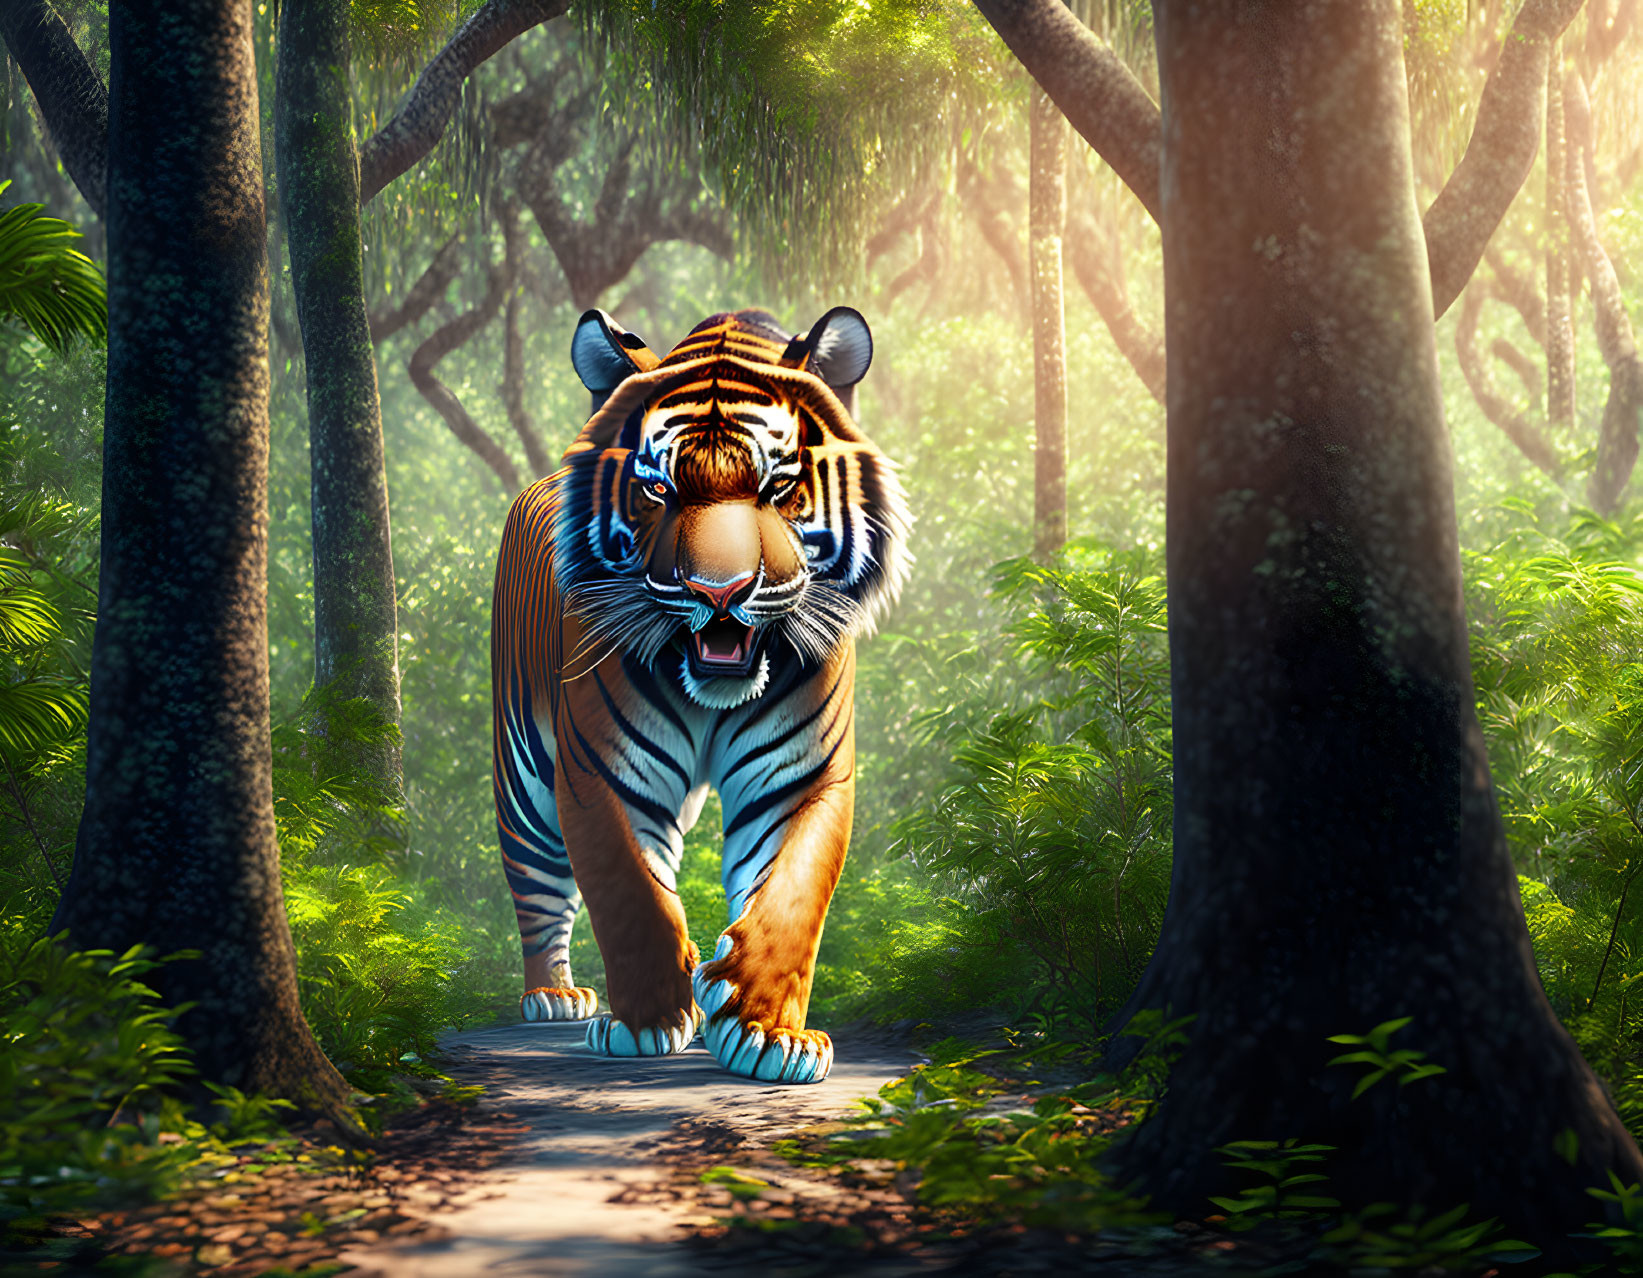 Majestic tiger in lush forest with sunlight rays